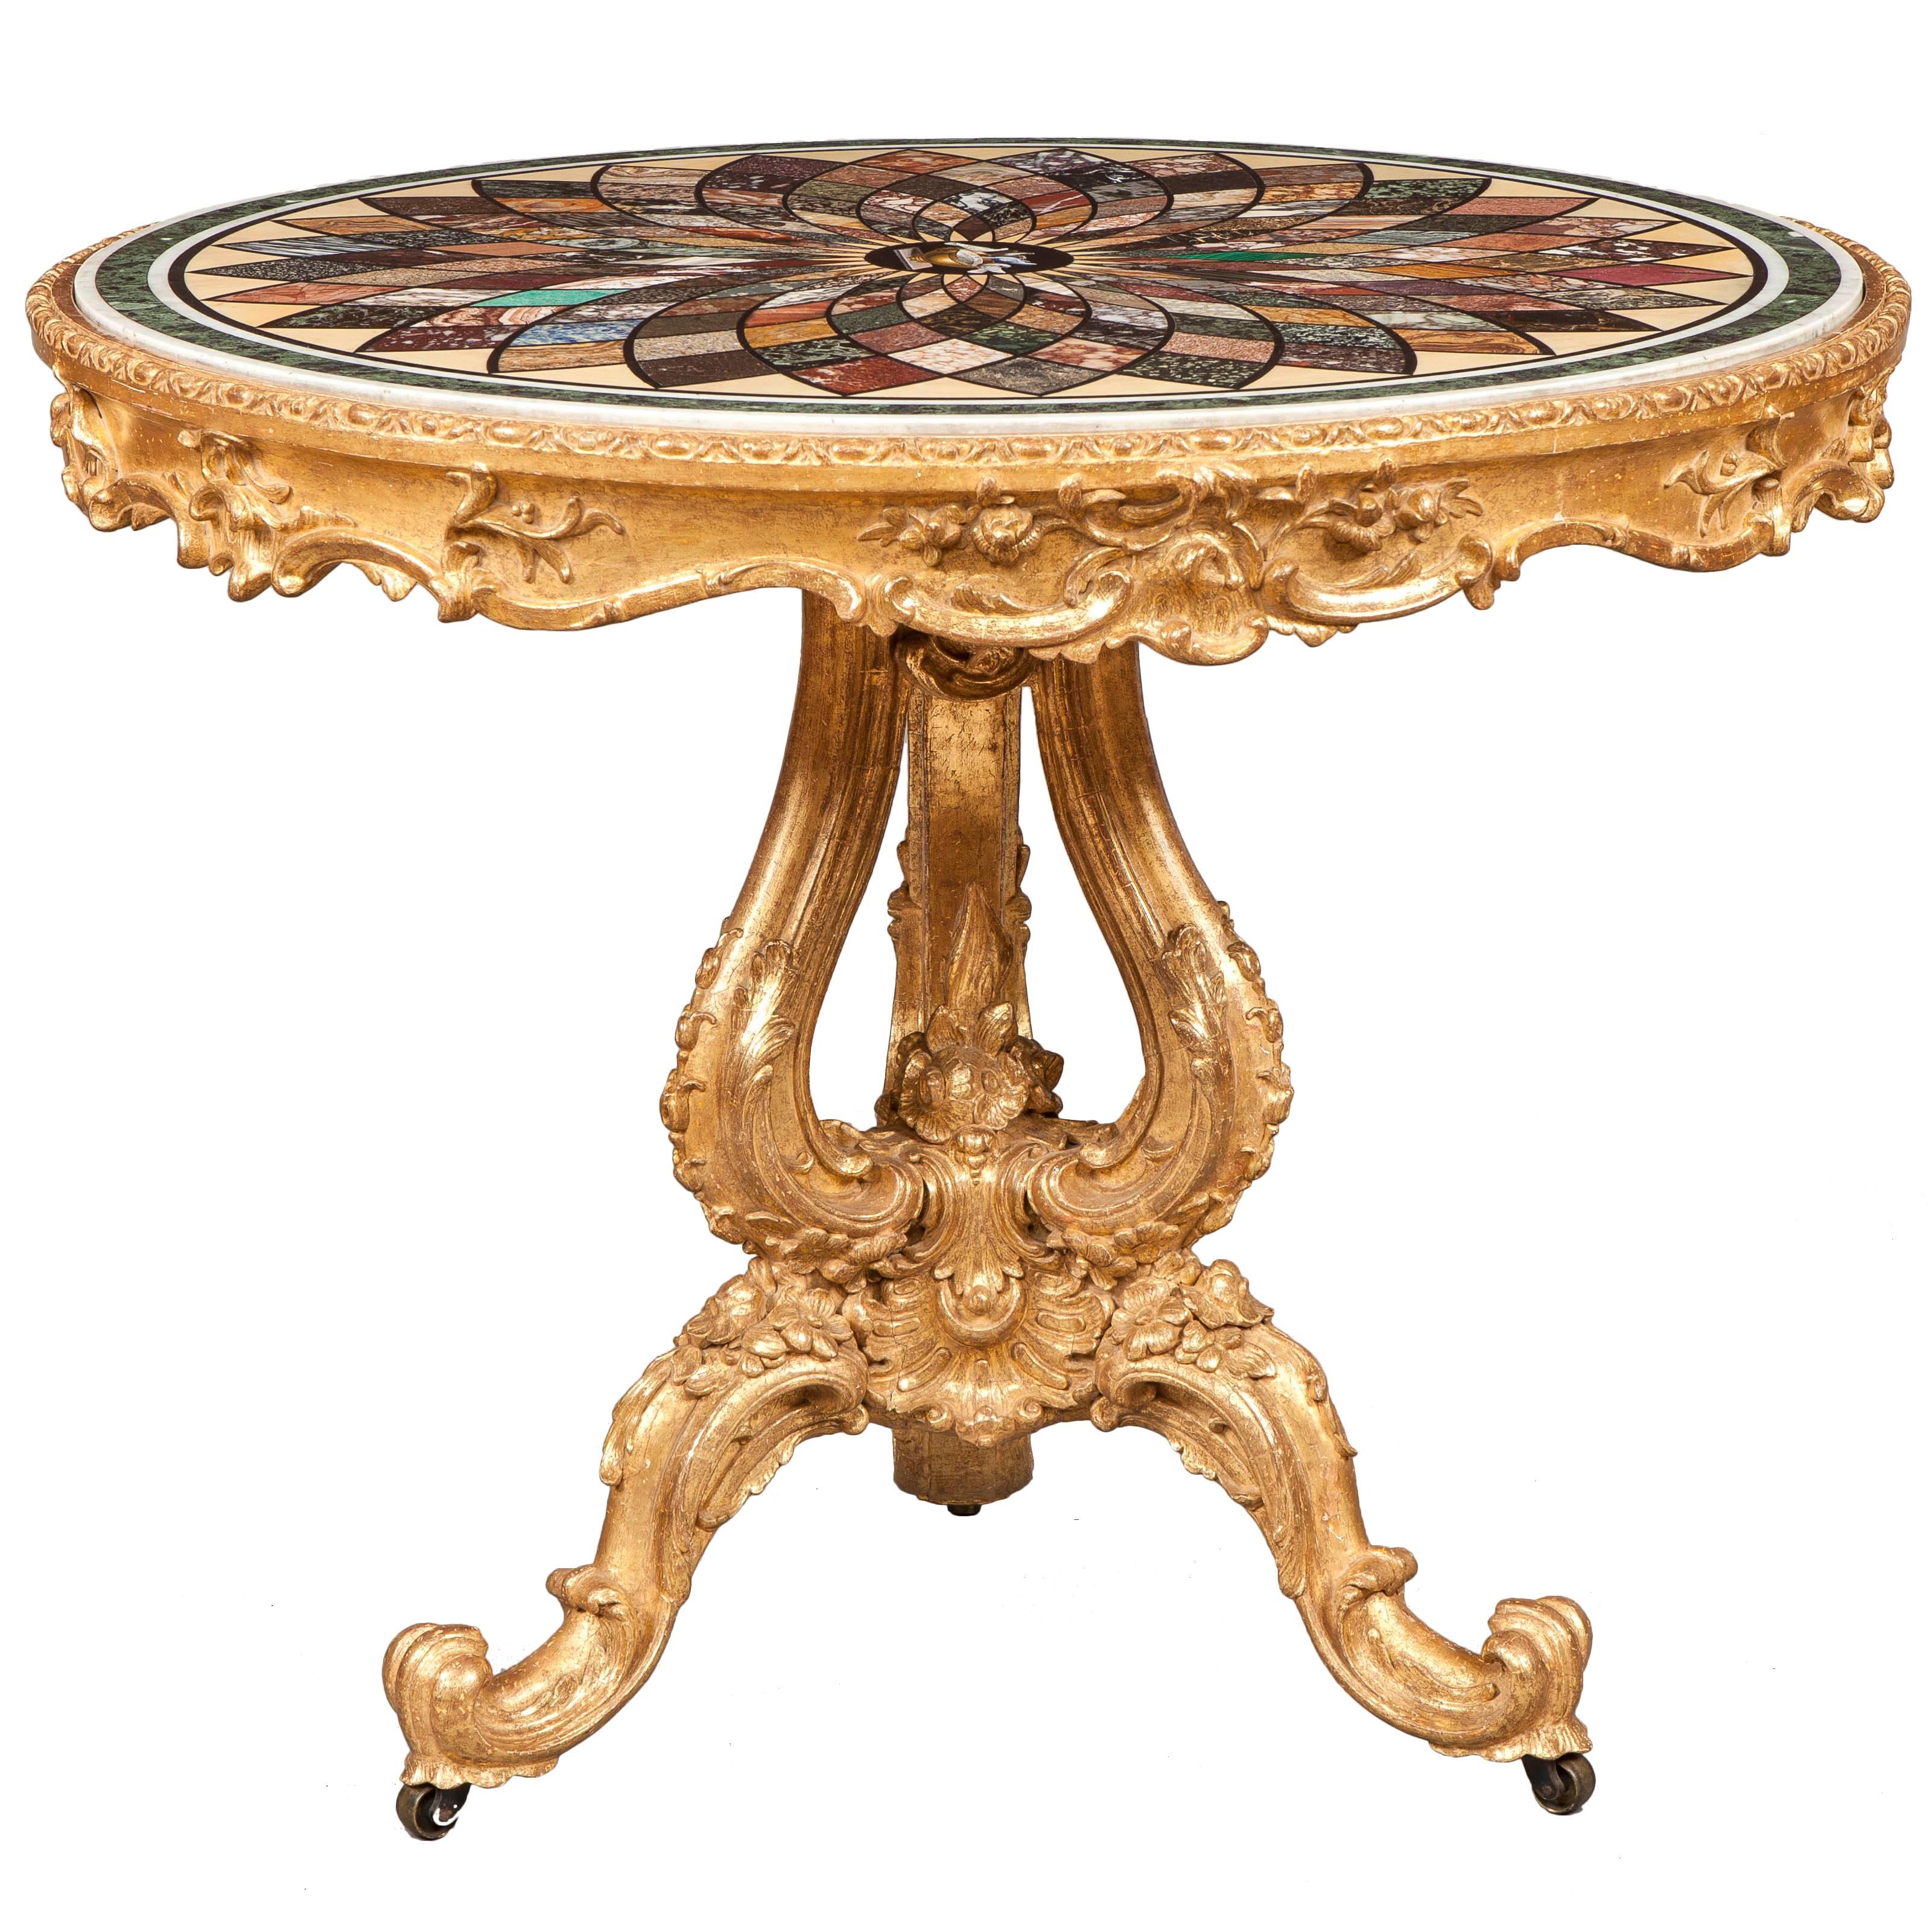 Italian Giltwood and Specimen Marble Topped Center Table, 19th Century